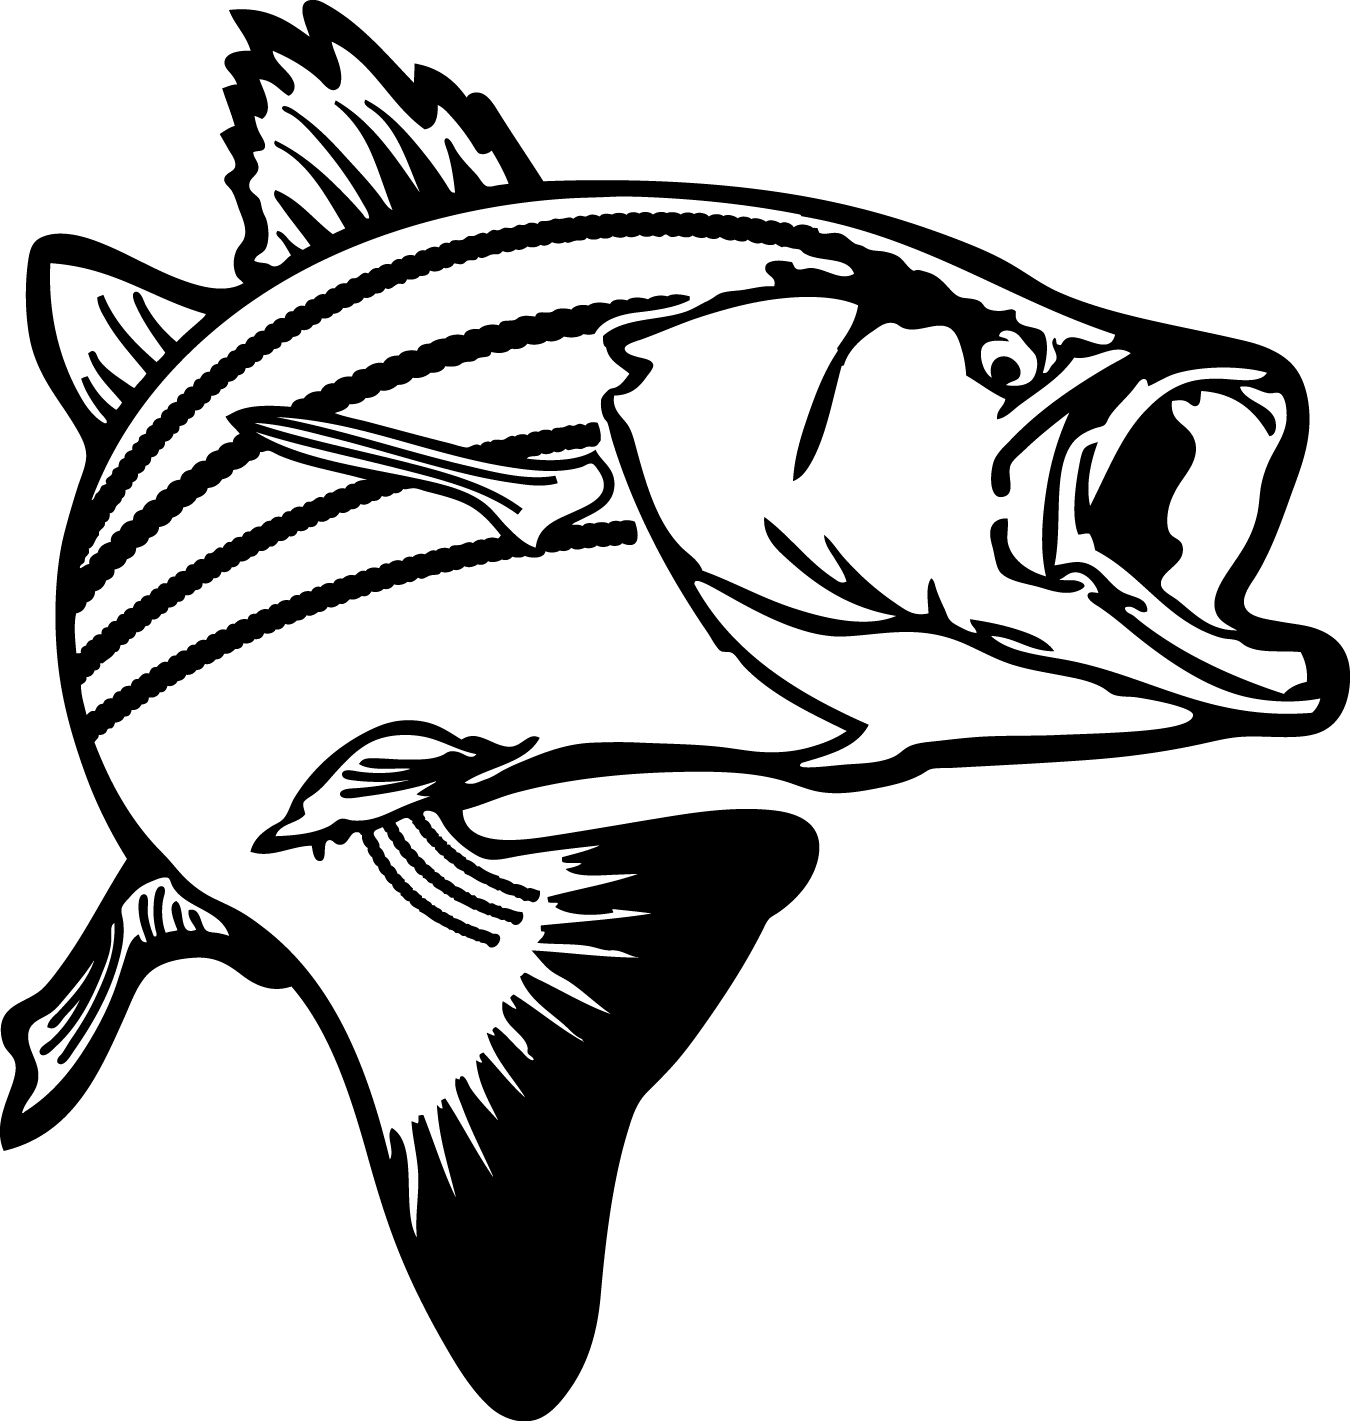 bass-fish-stencil-free-download-on-clipartmag